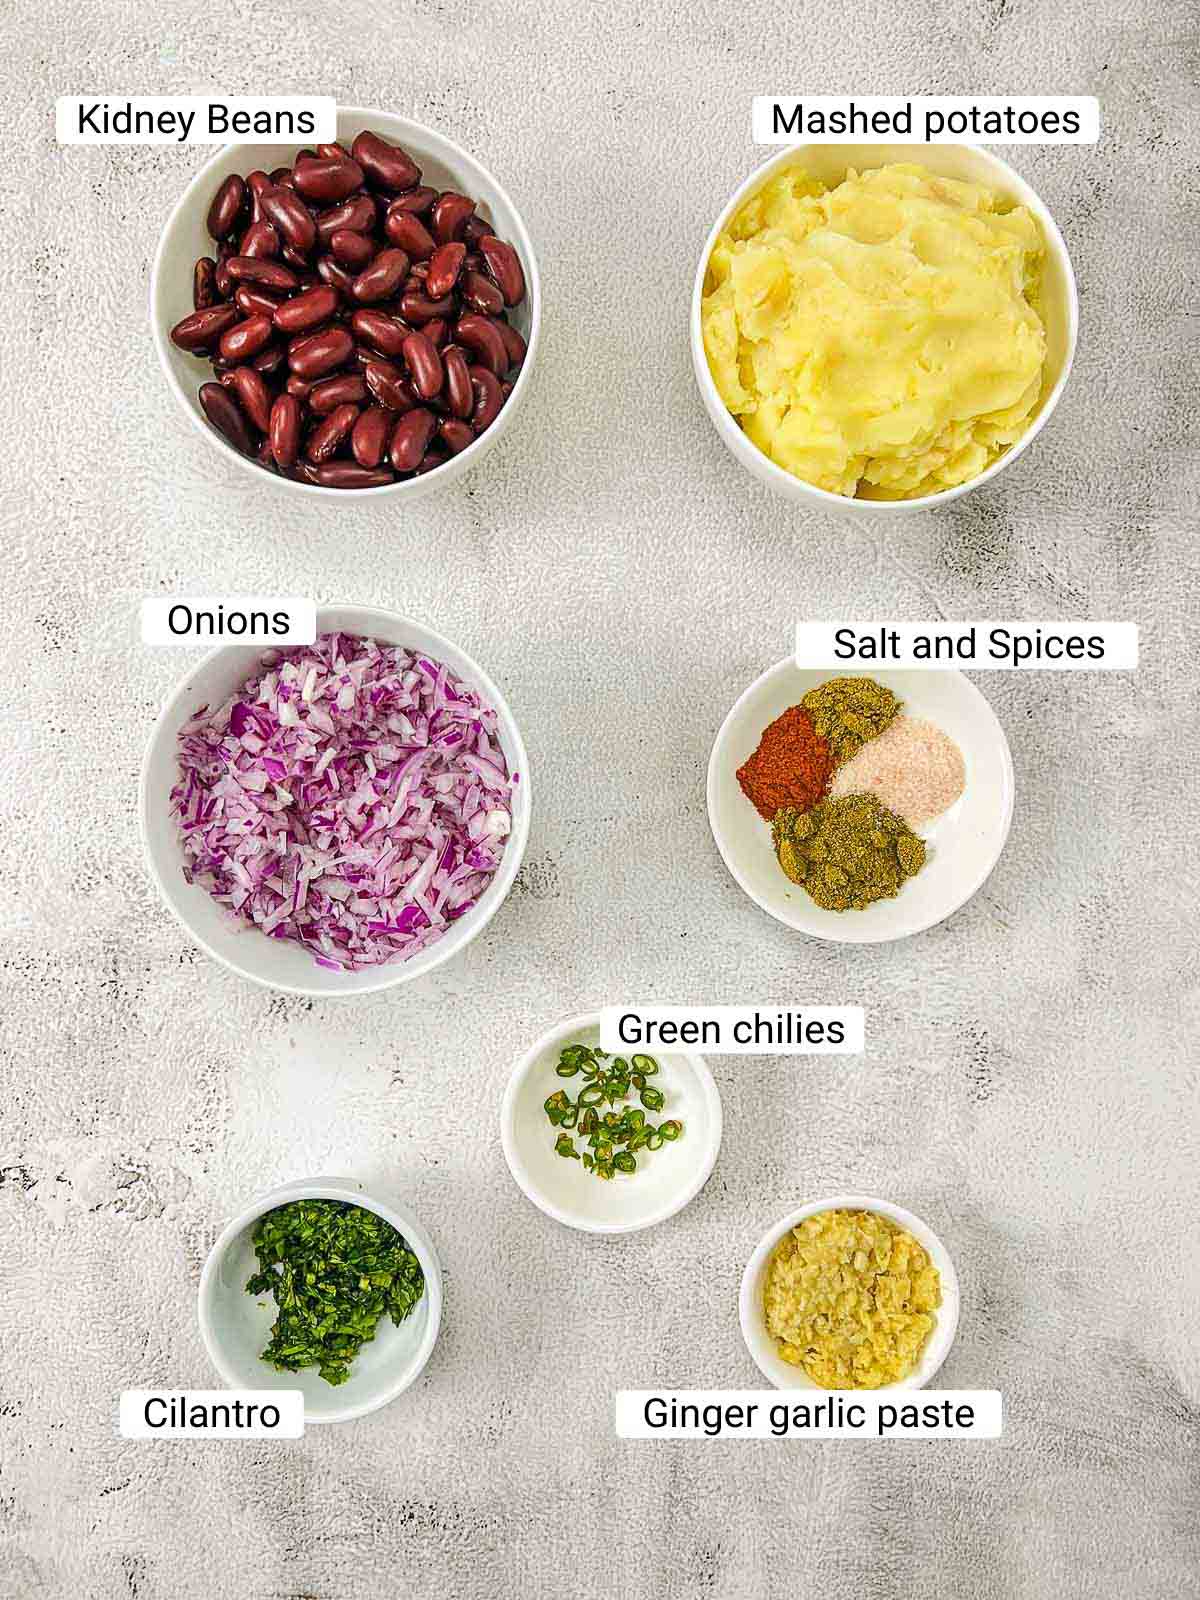 Ingredients to make kidney bean patties on a white surface.